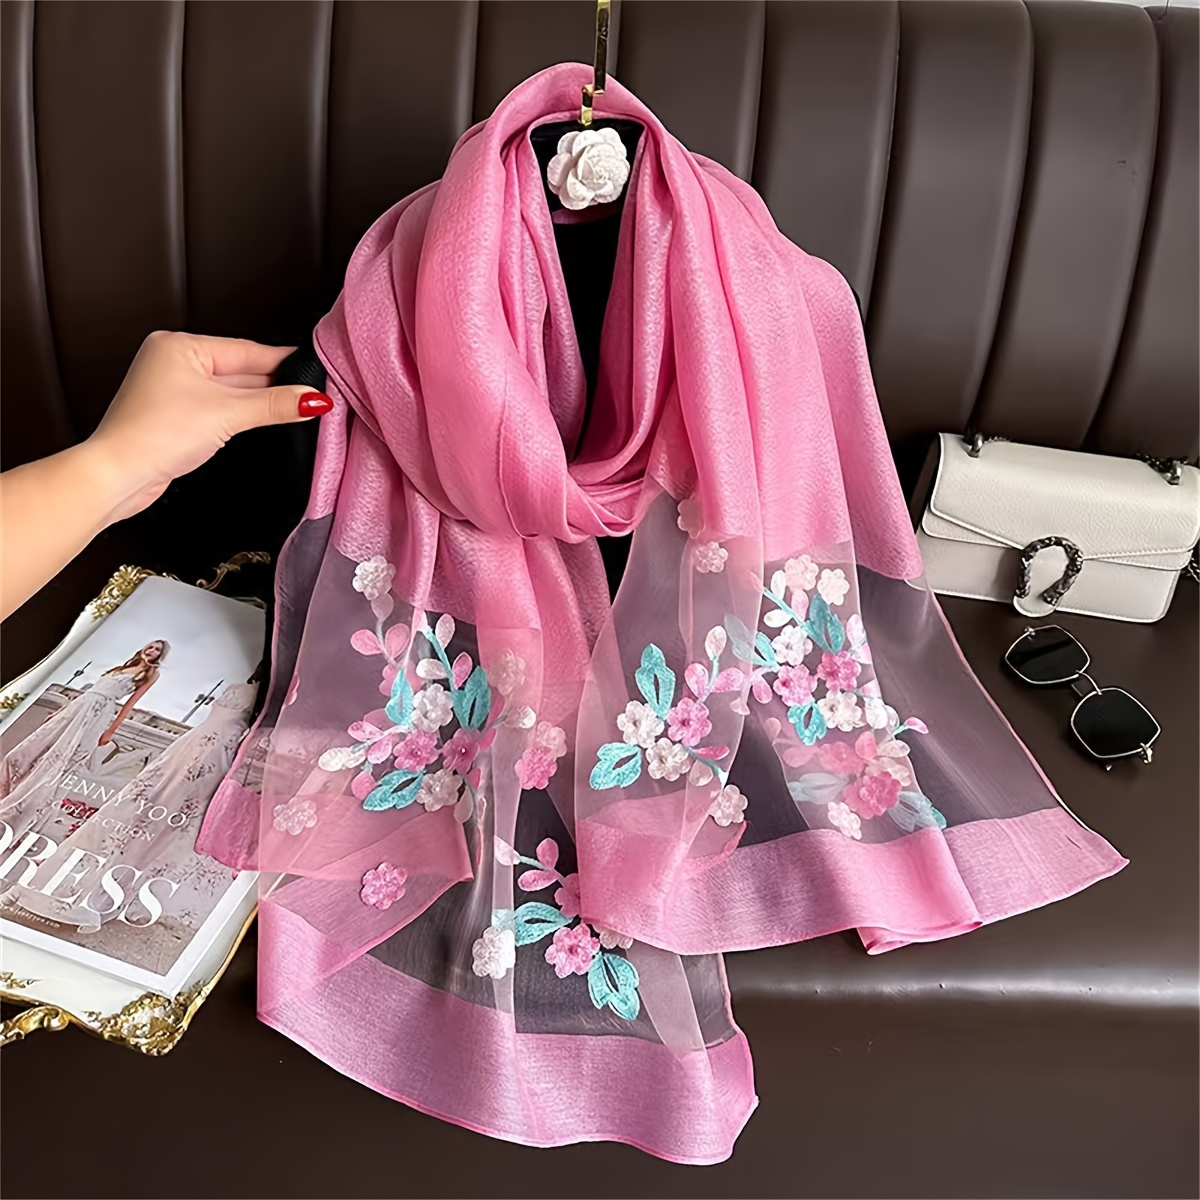 

Embroidered Flower Scarf Thin Breathable Shawl Mature Style Sunscreen Travel Scarf For Women